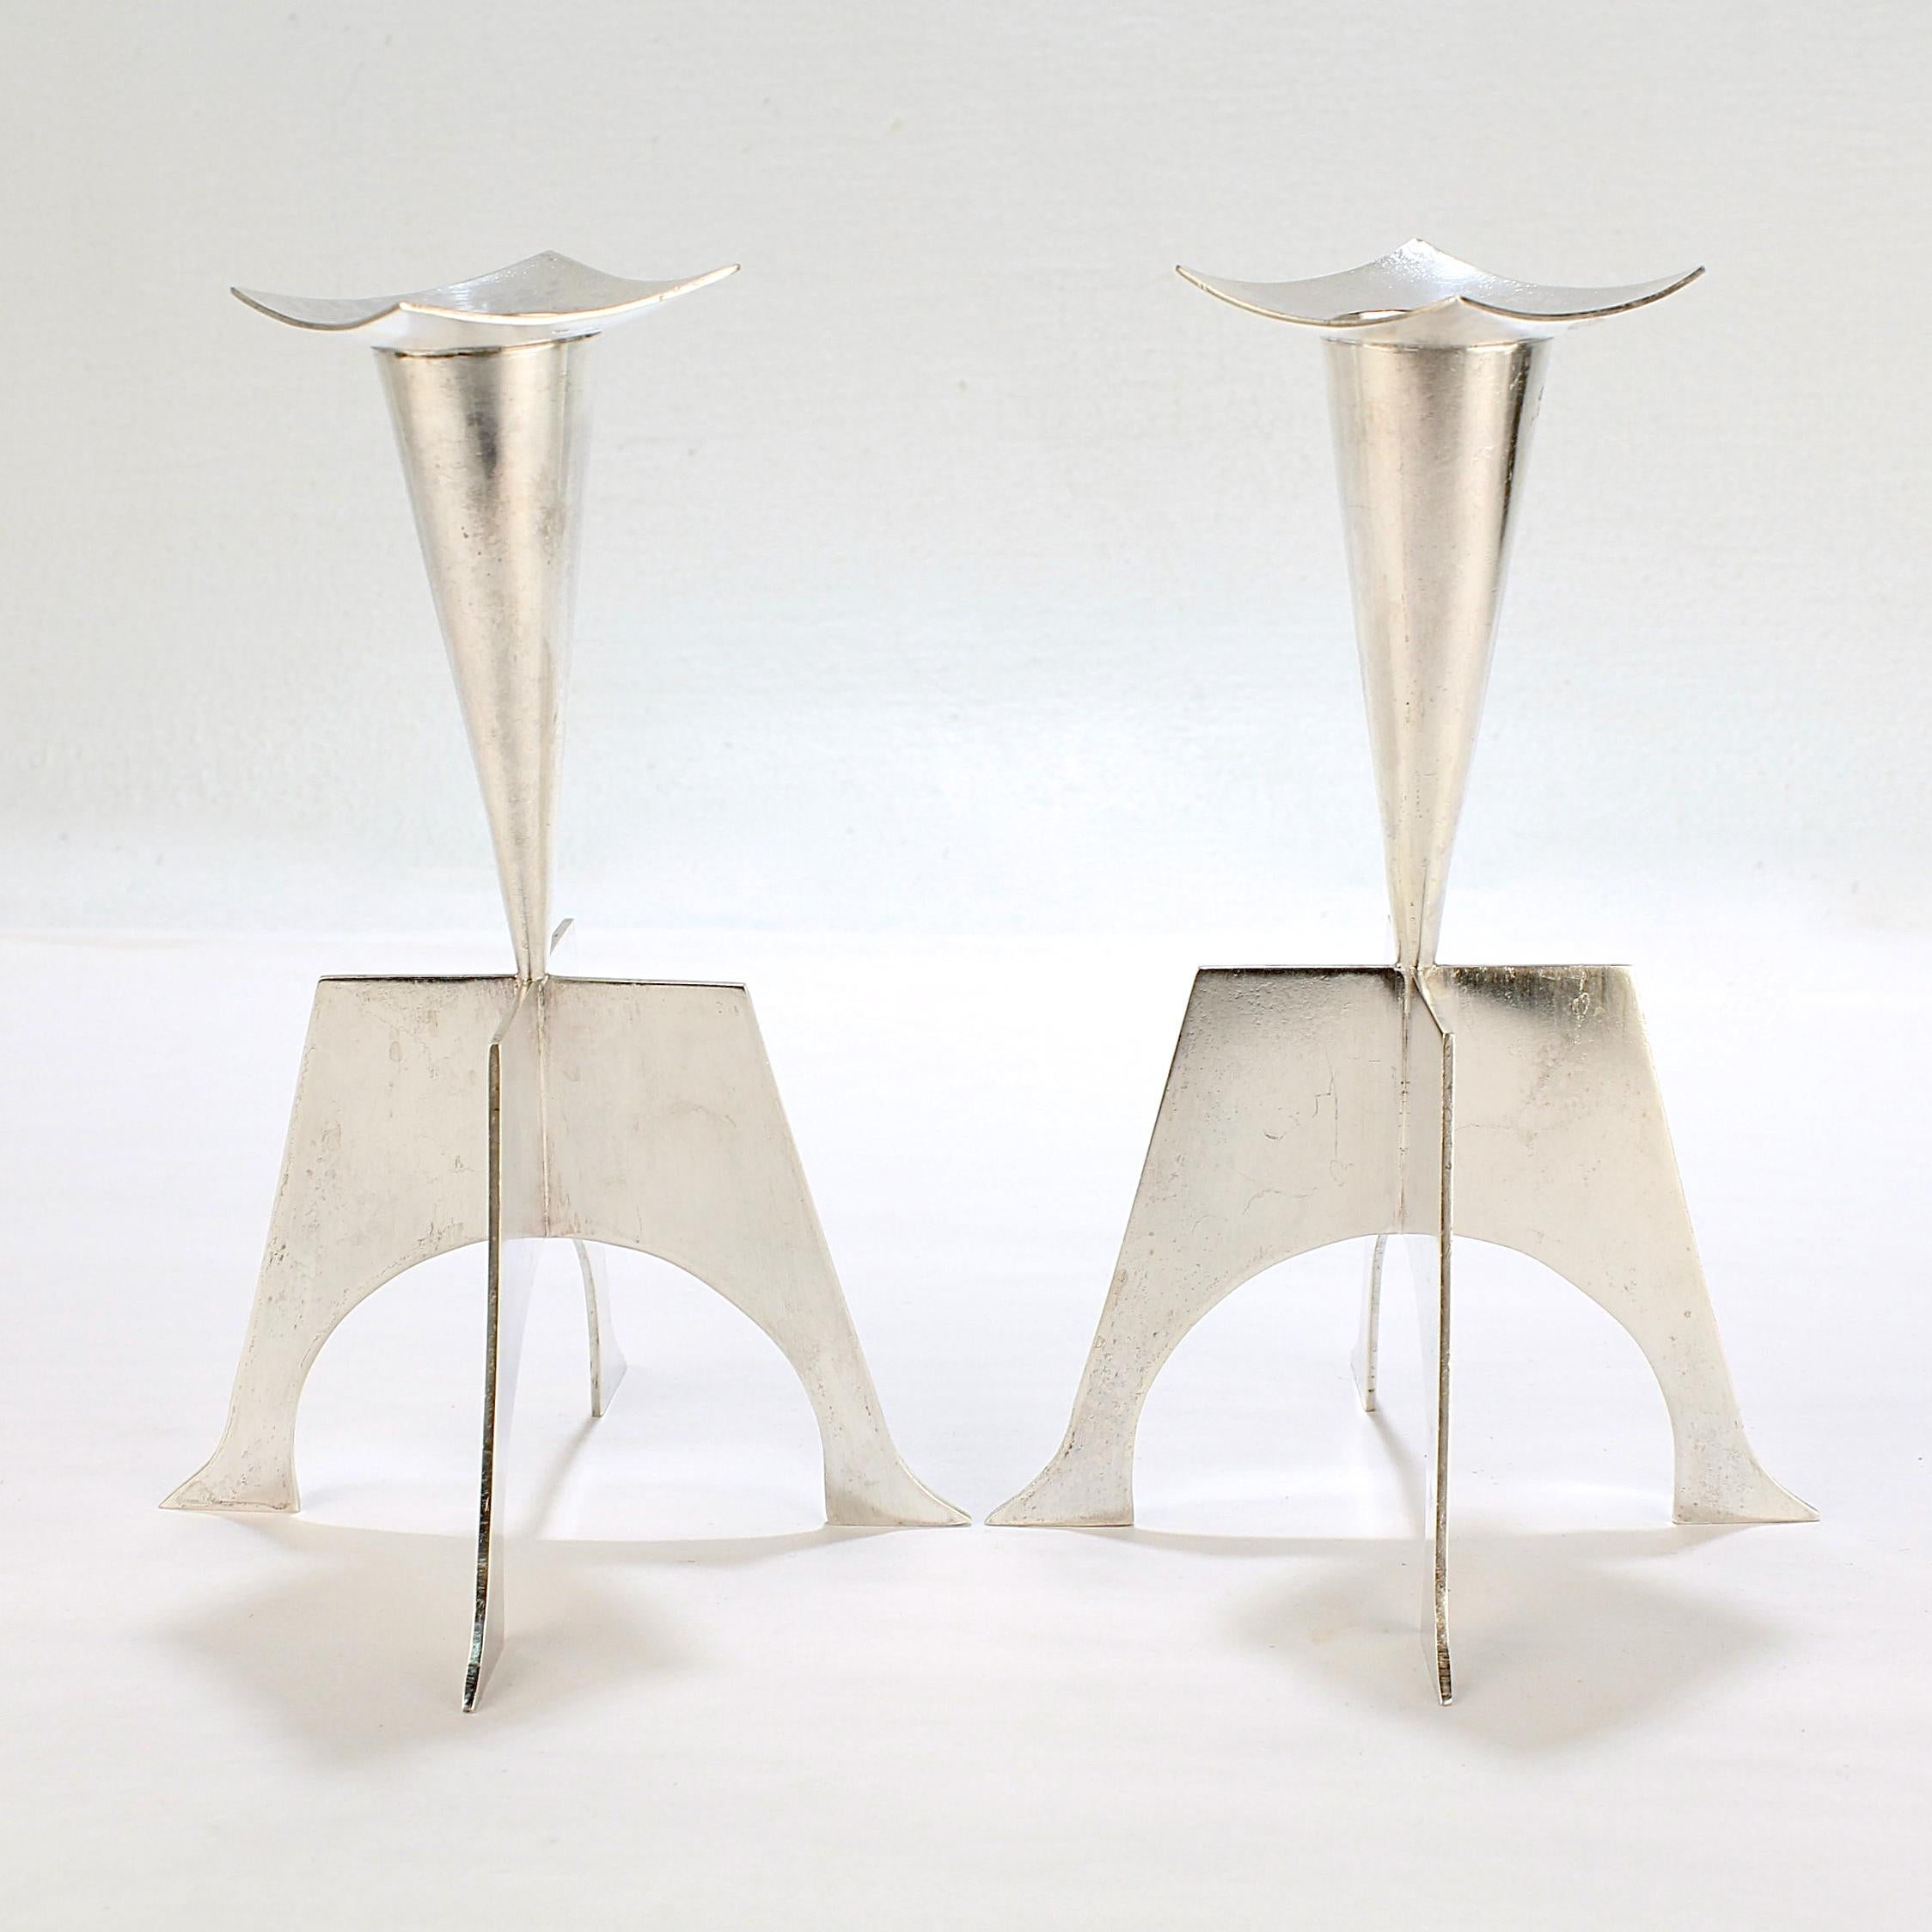 A fine pair of modernist sterling silver candlesticks.

Handmade by the renowned silversmith Kurt Matzdorf.

The surface of the silver shows a varied texture almost like a variegation. It's quite possibly Matzdorf smelted the silver alloy and made